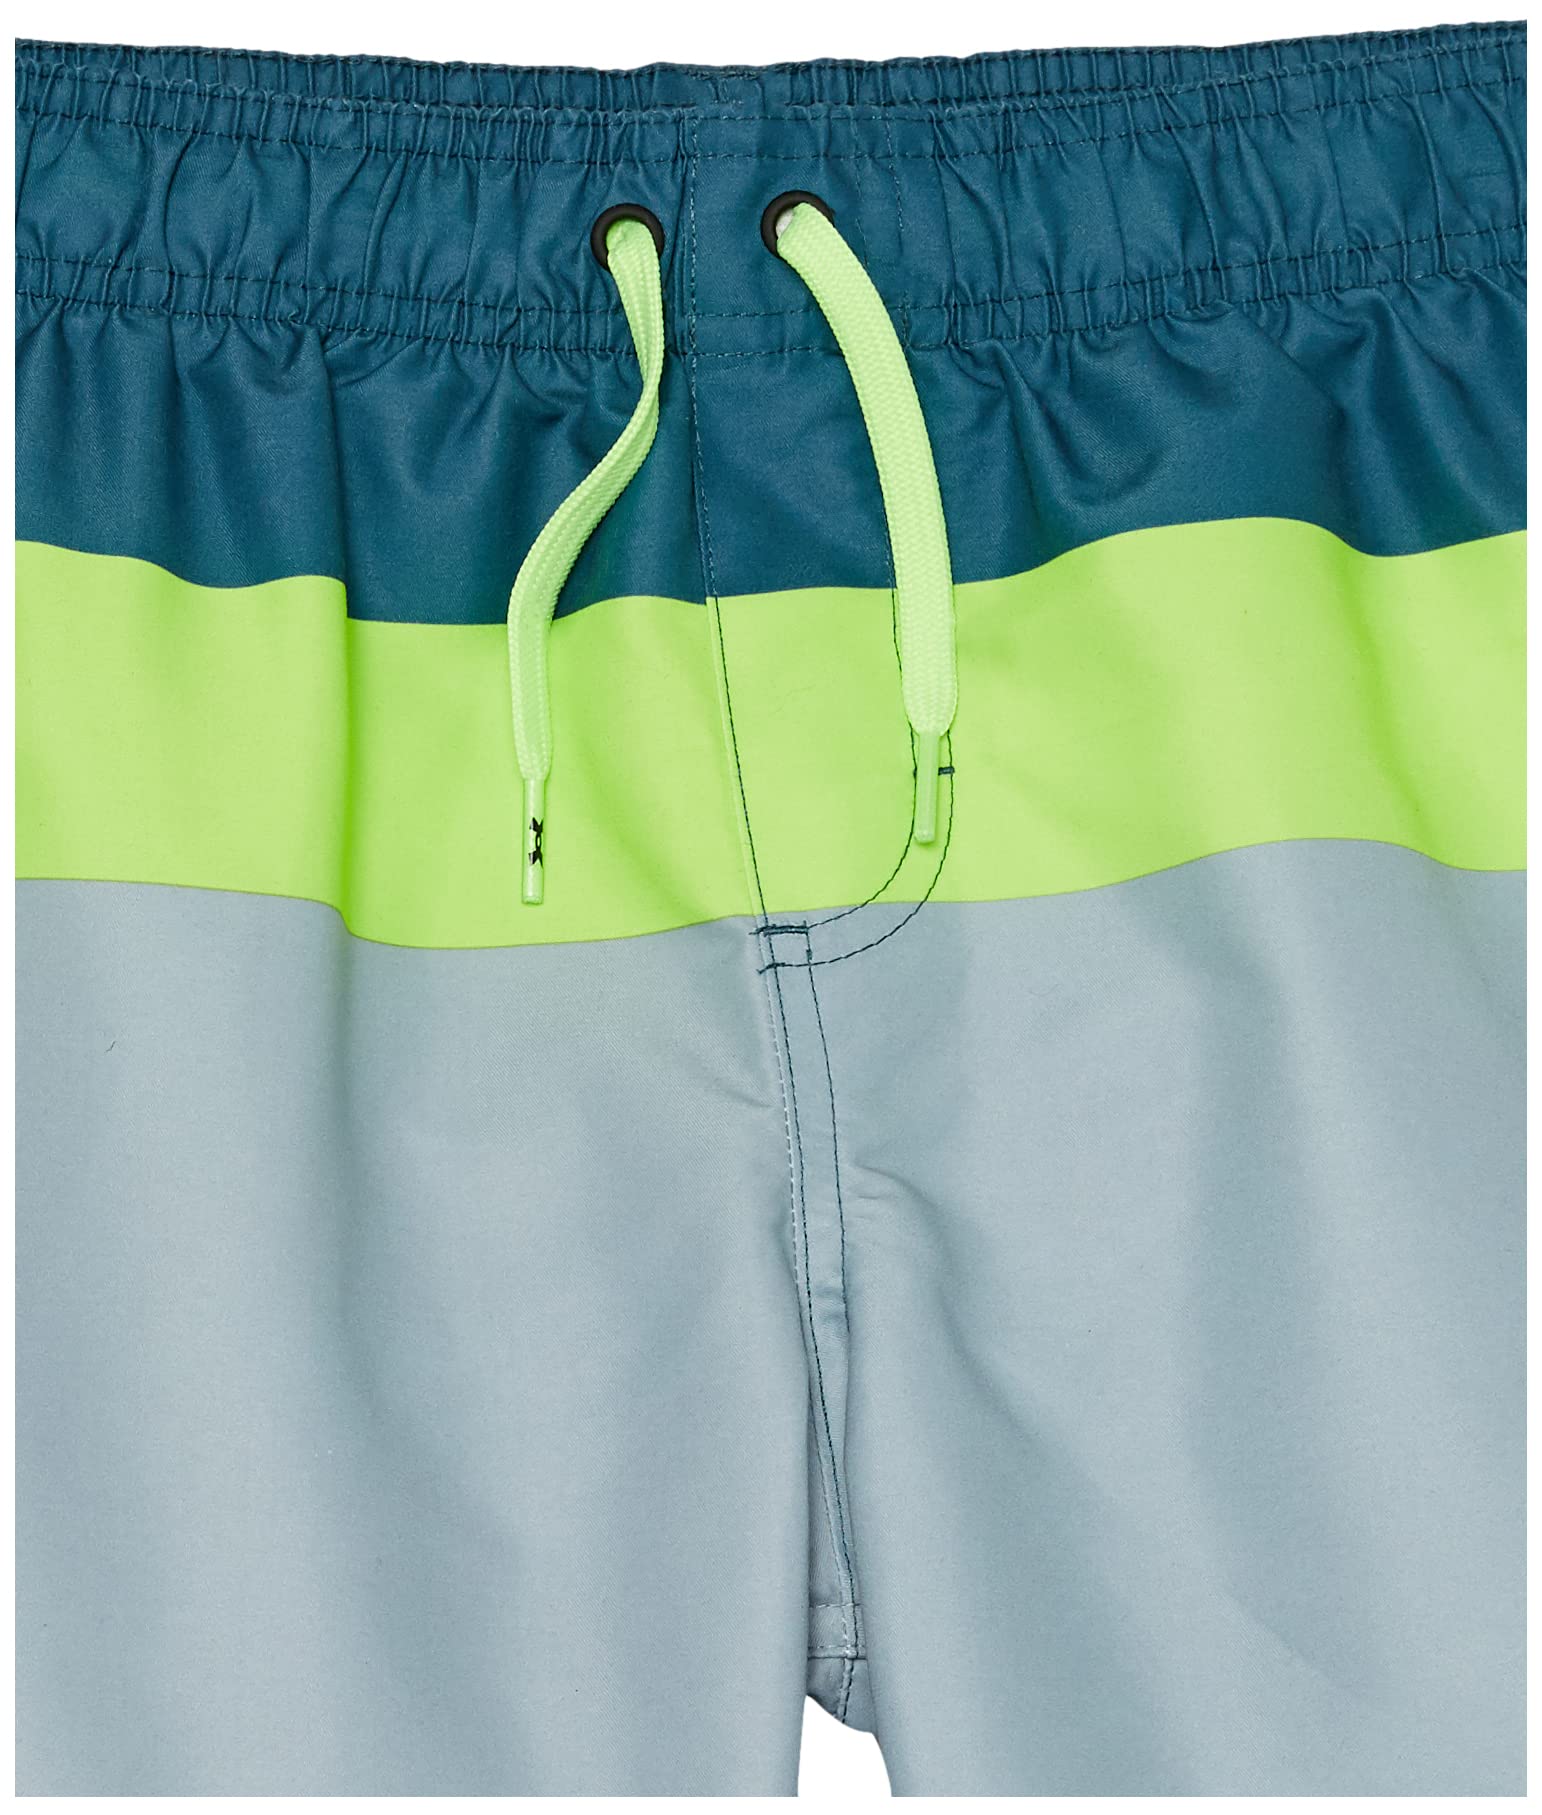 Under Armour Boys' Swim Trunk Shorts, Lightweight & Water Repelling, Quick Dry Material, Static Blue Triblock, X-Large